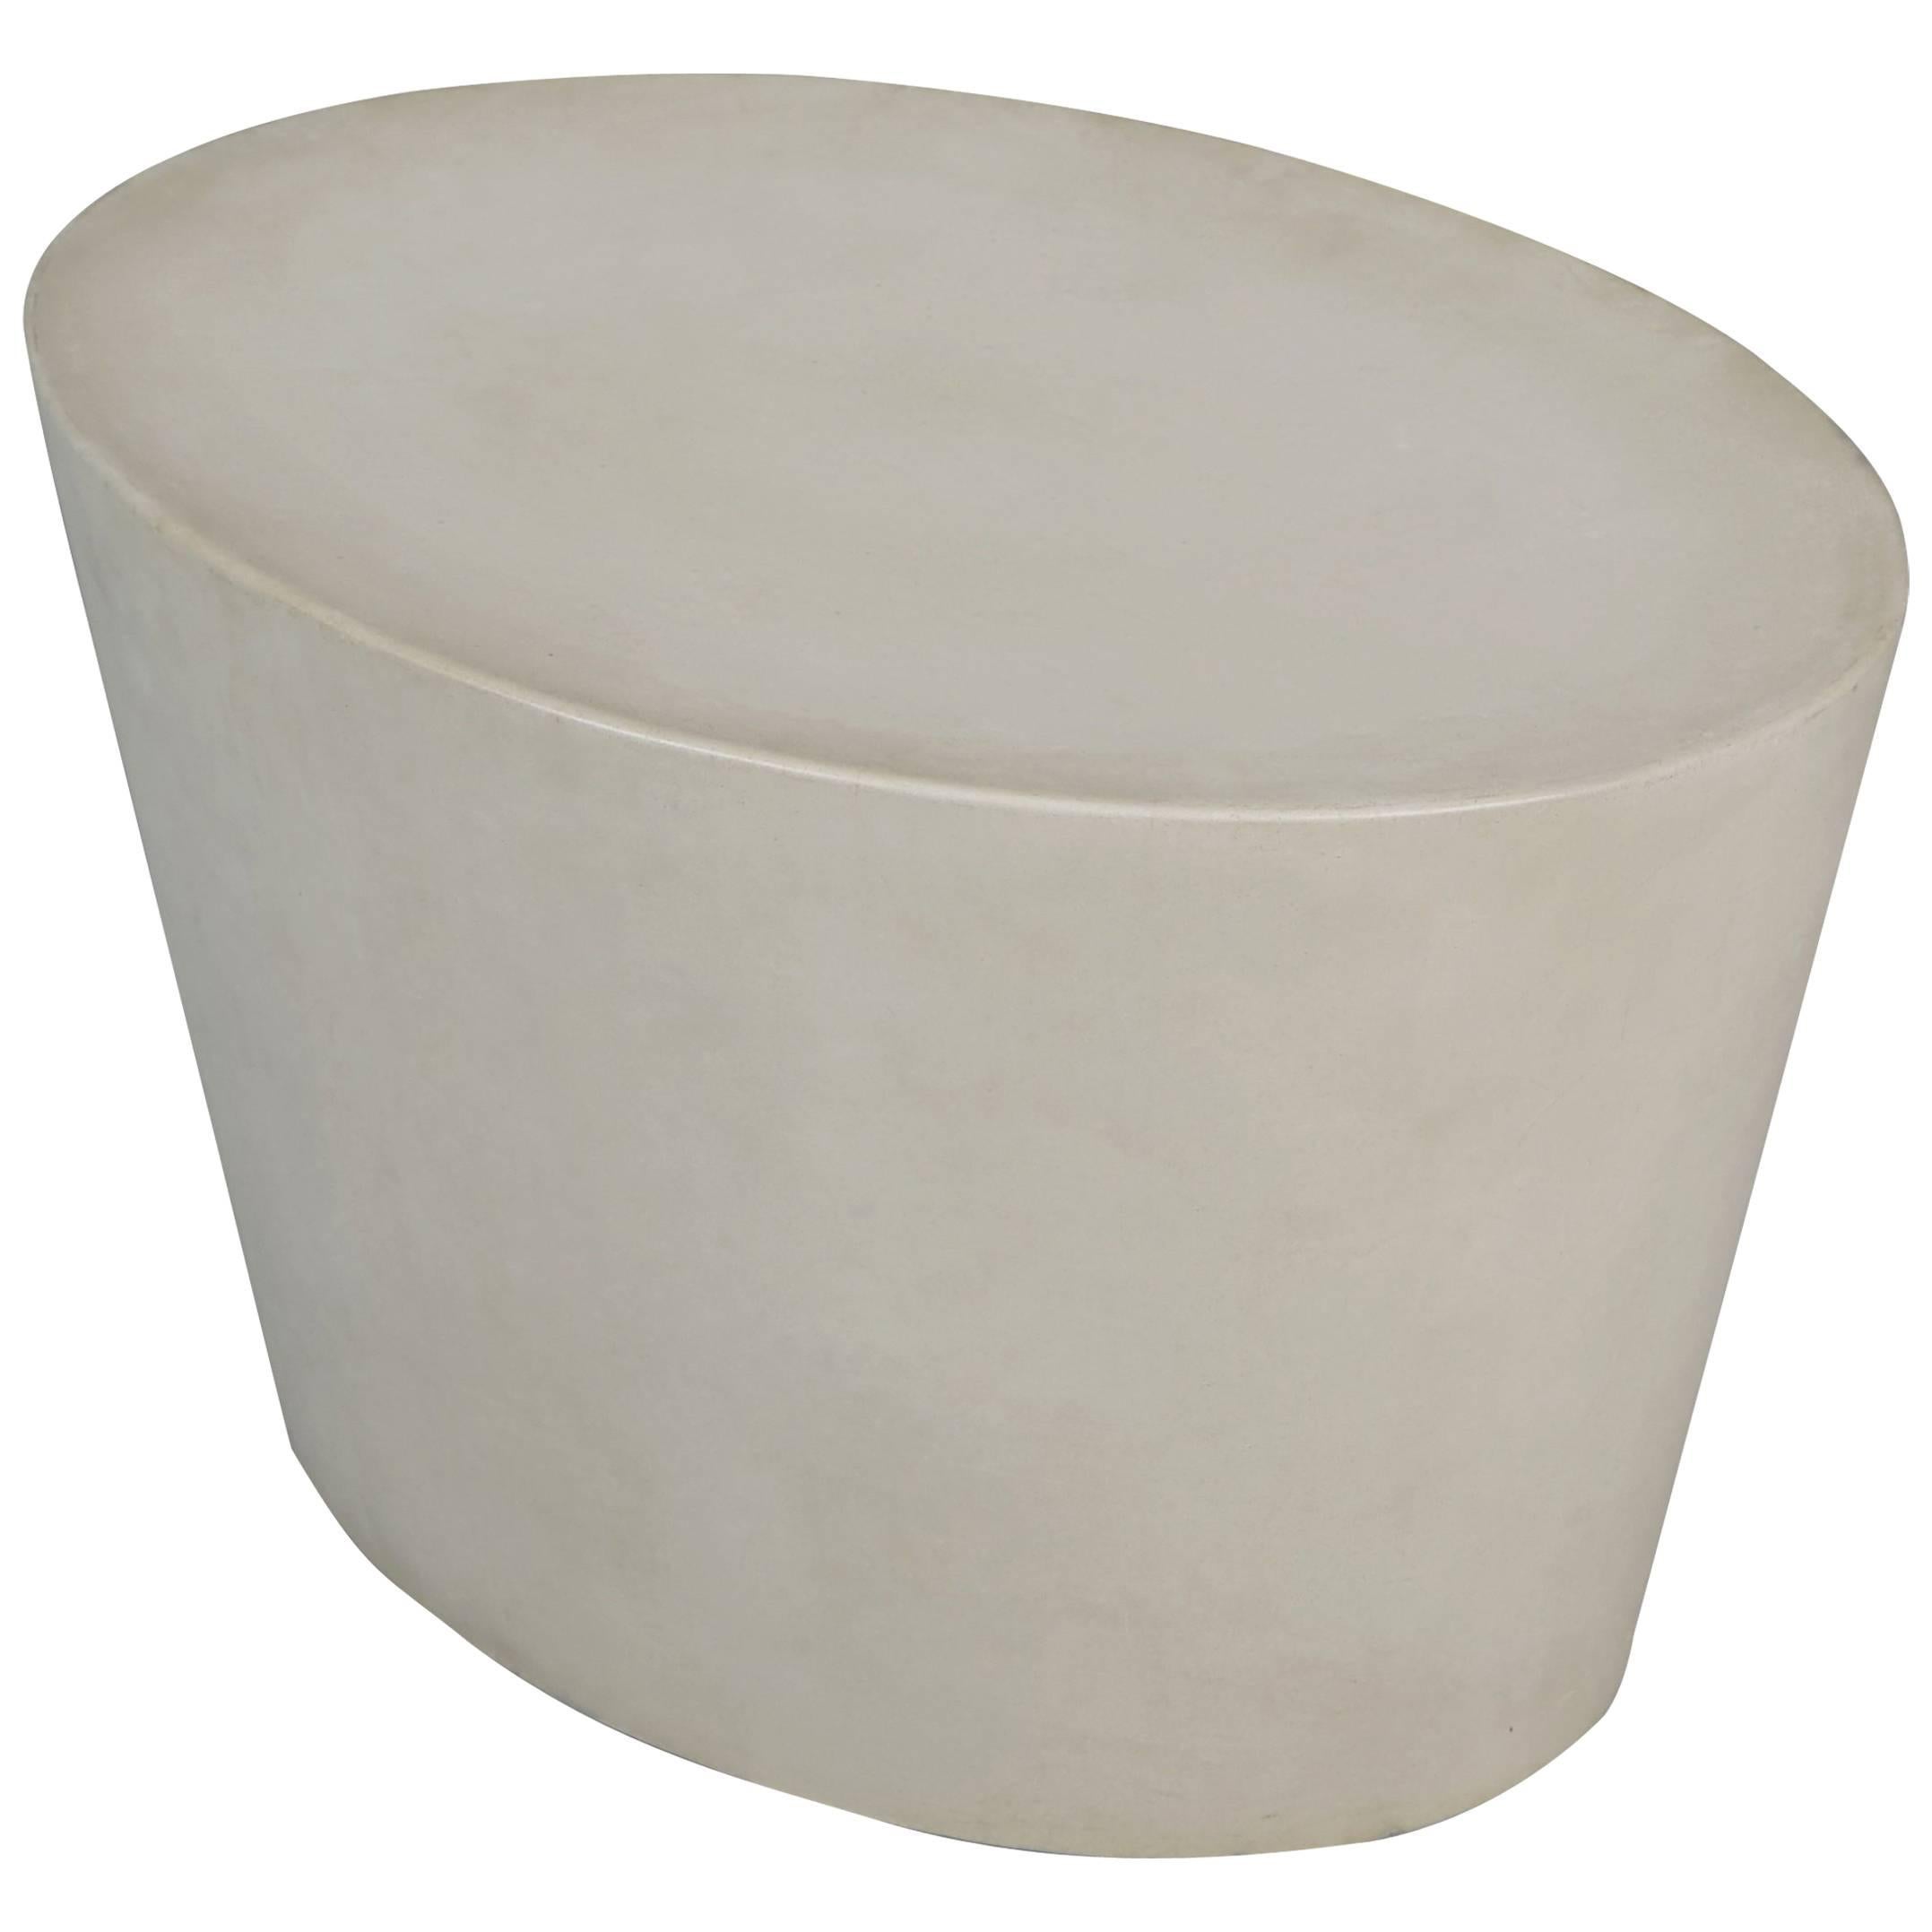 This first generation Maya Lin stool is fabricated of molded concrete, unlike the polyethylene (plastic) modern versions of today, and is stamped at the bottom. These original early production examples are no longer in production and are much higher